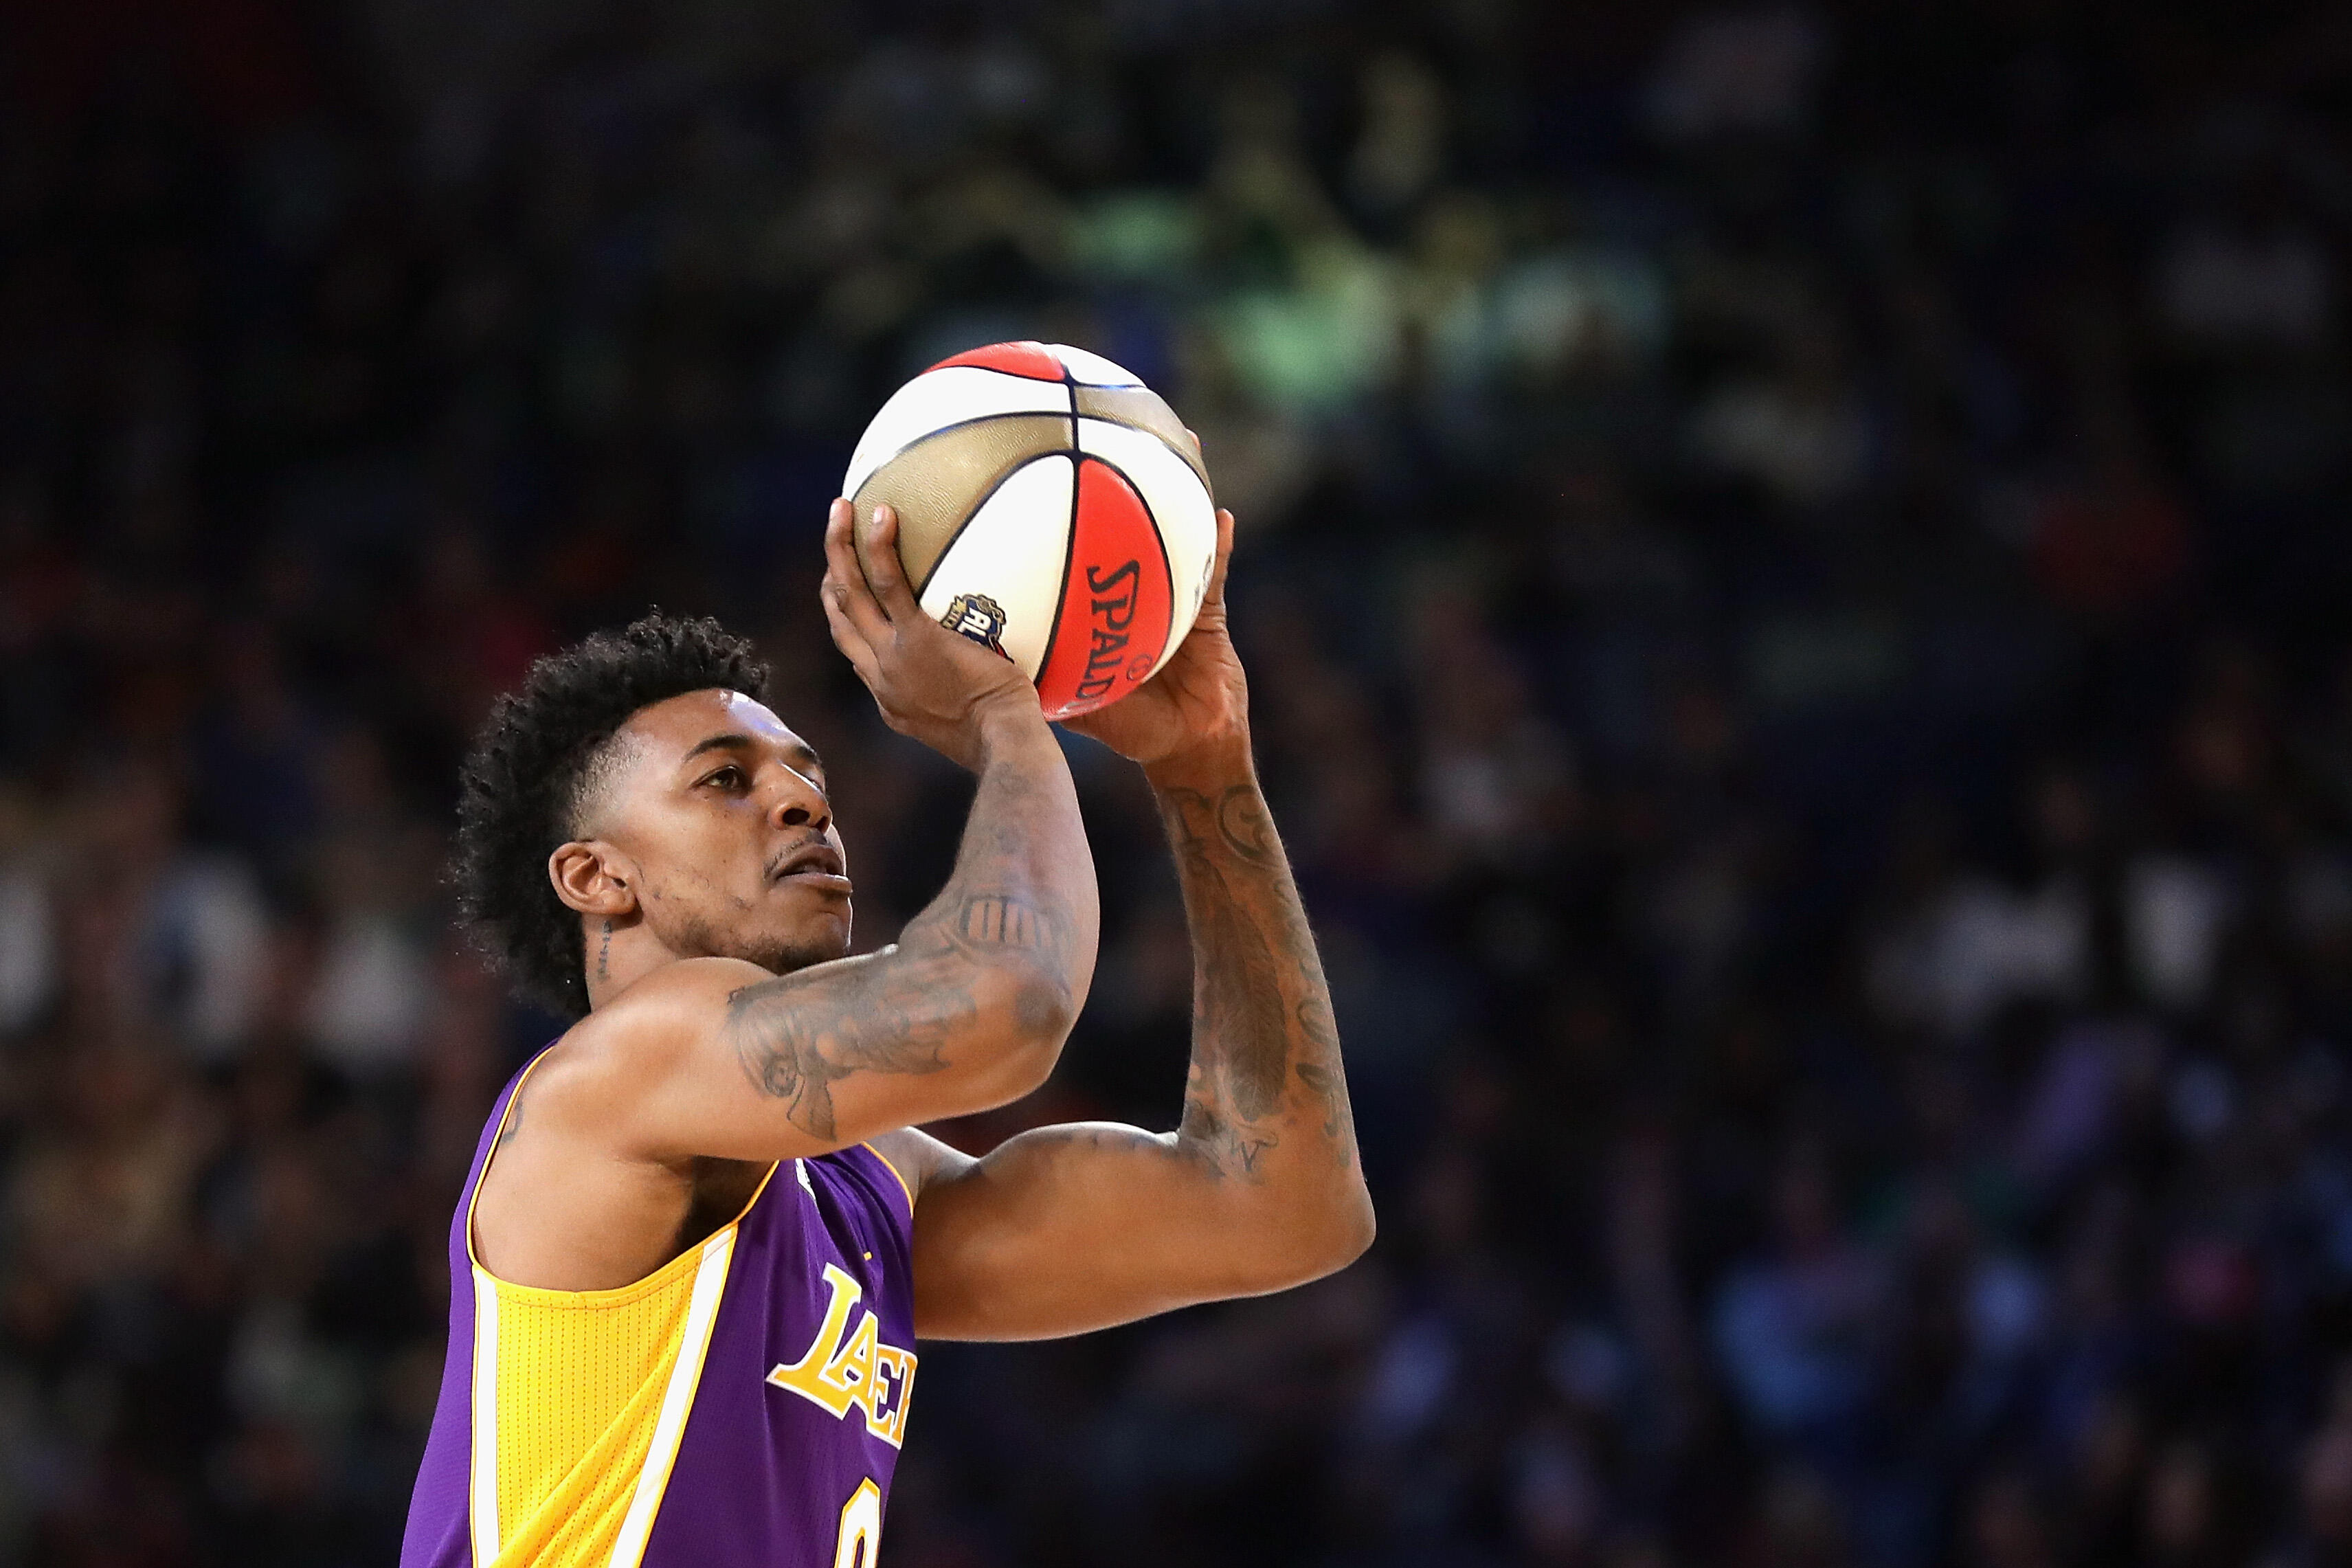 NEW ORLEANS, LA - FEBRUARY 18:  Nick Young #0 of the Los Angeles Lakers competes in the 2017 JBL Three-Point Contest at Smoothie King Center on February 18, 2017 in New Orleans, Louisiana. NOTE TO USER: User expressly acknowledges and agrees that, by down